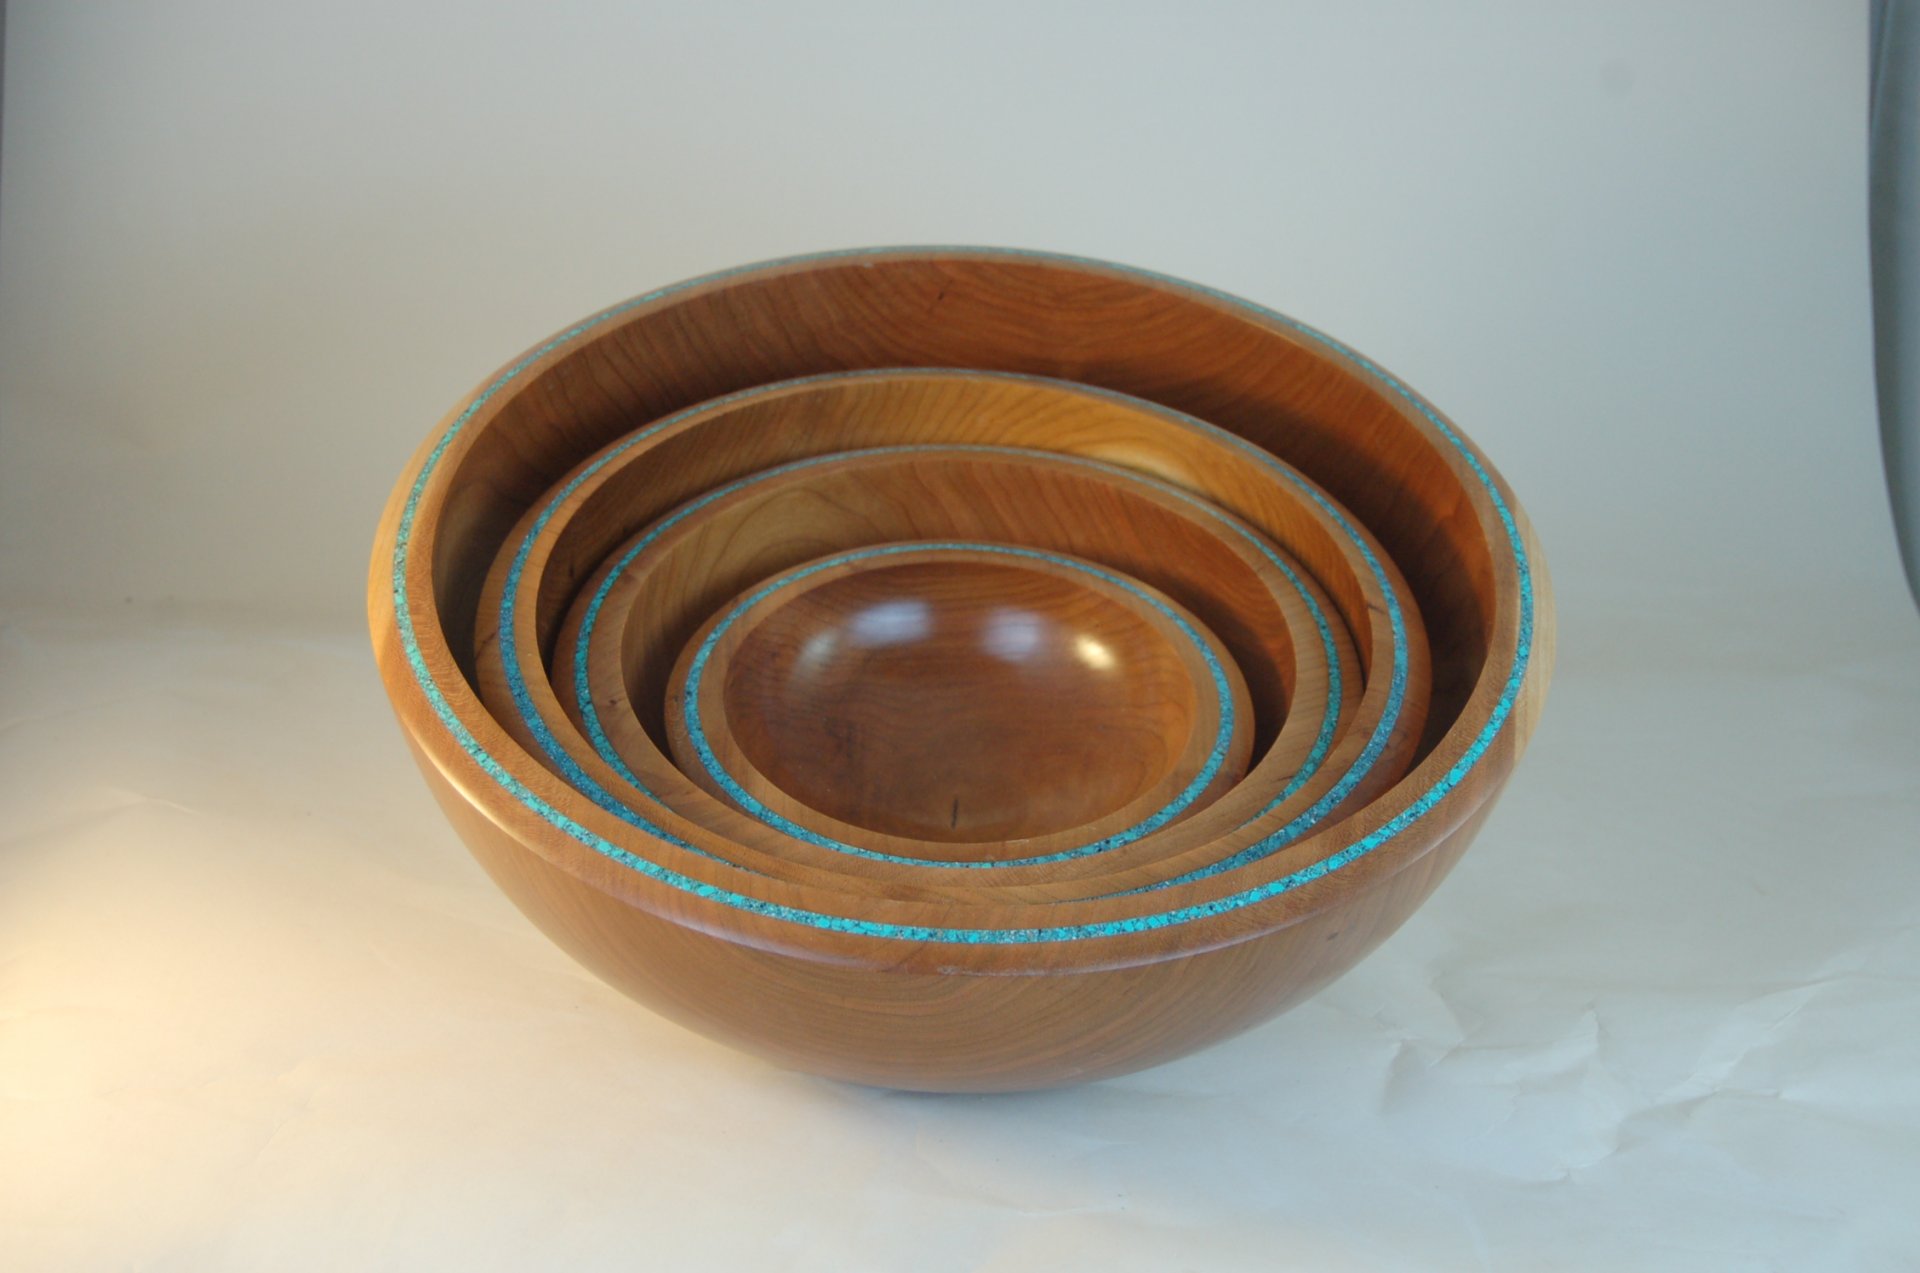 Nested Cherry Bowls